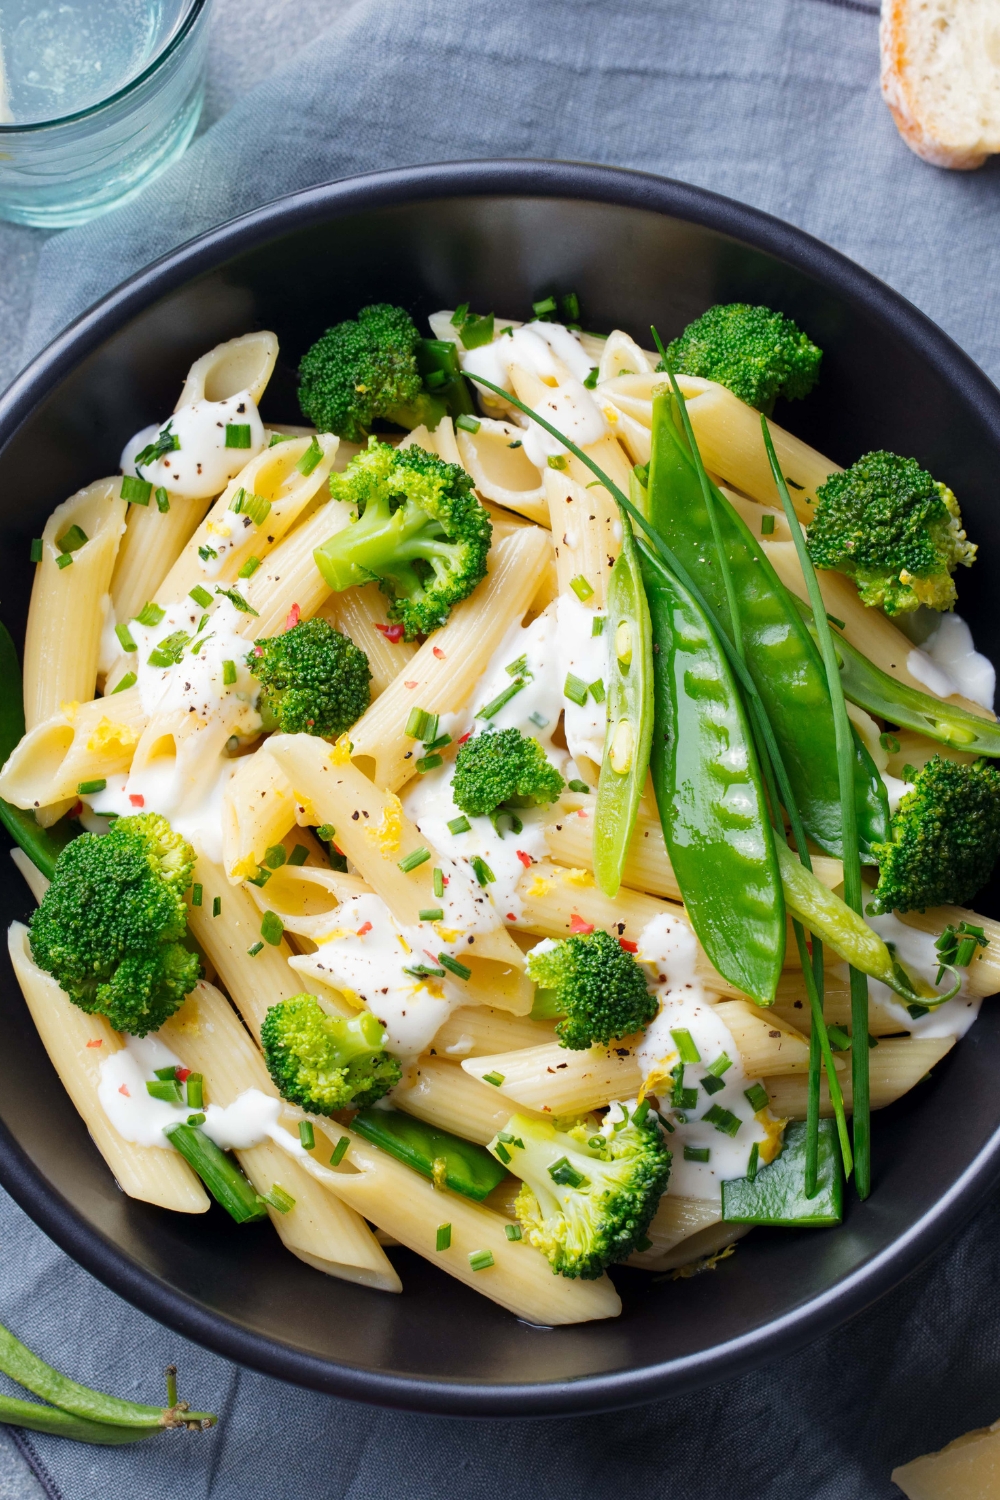 Pasta with Broccoli, Peas and Creamy Sauce, Garnished With Pepper and Chopped Onion Leaves